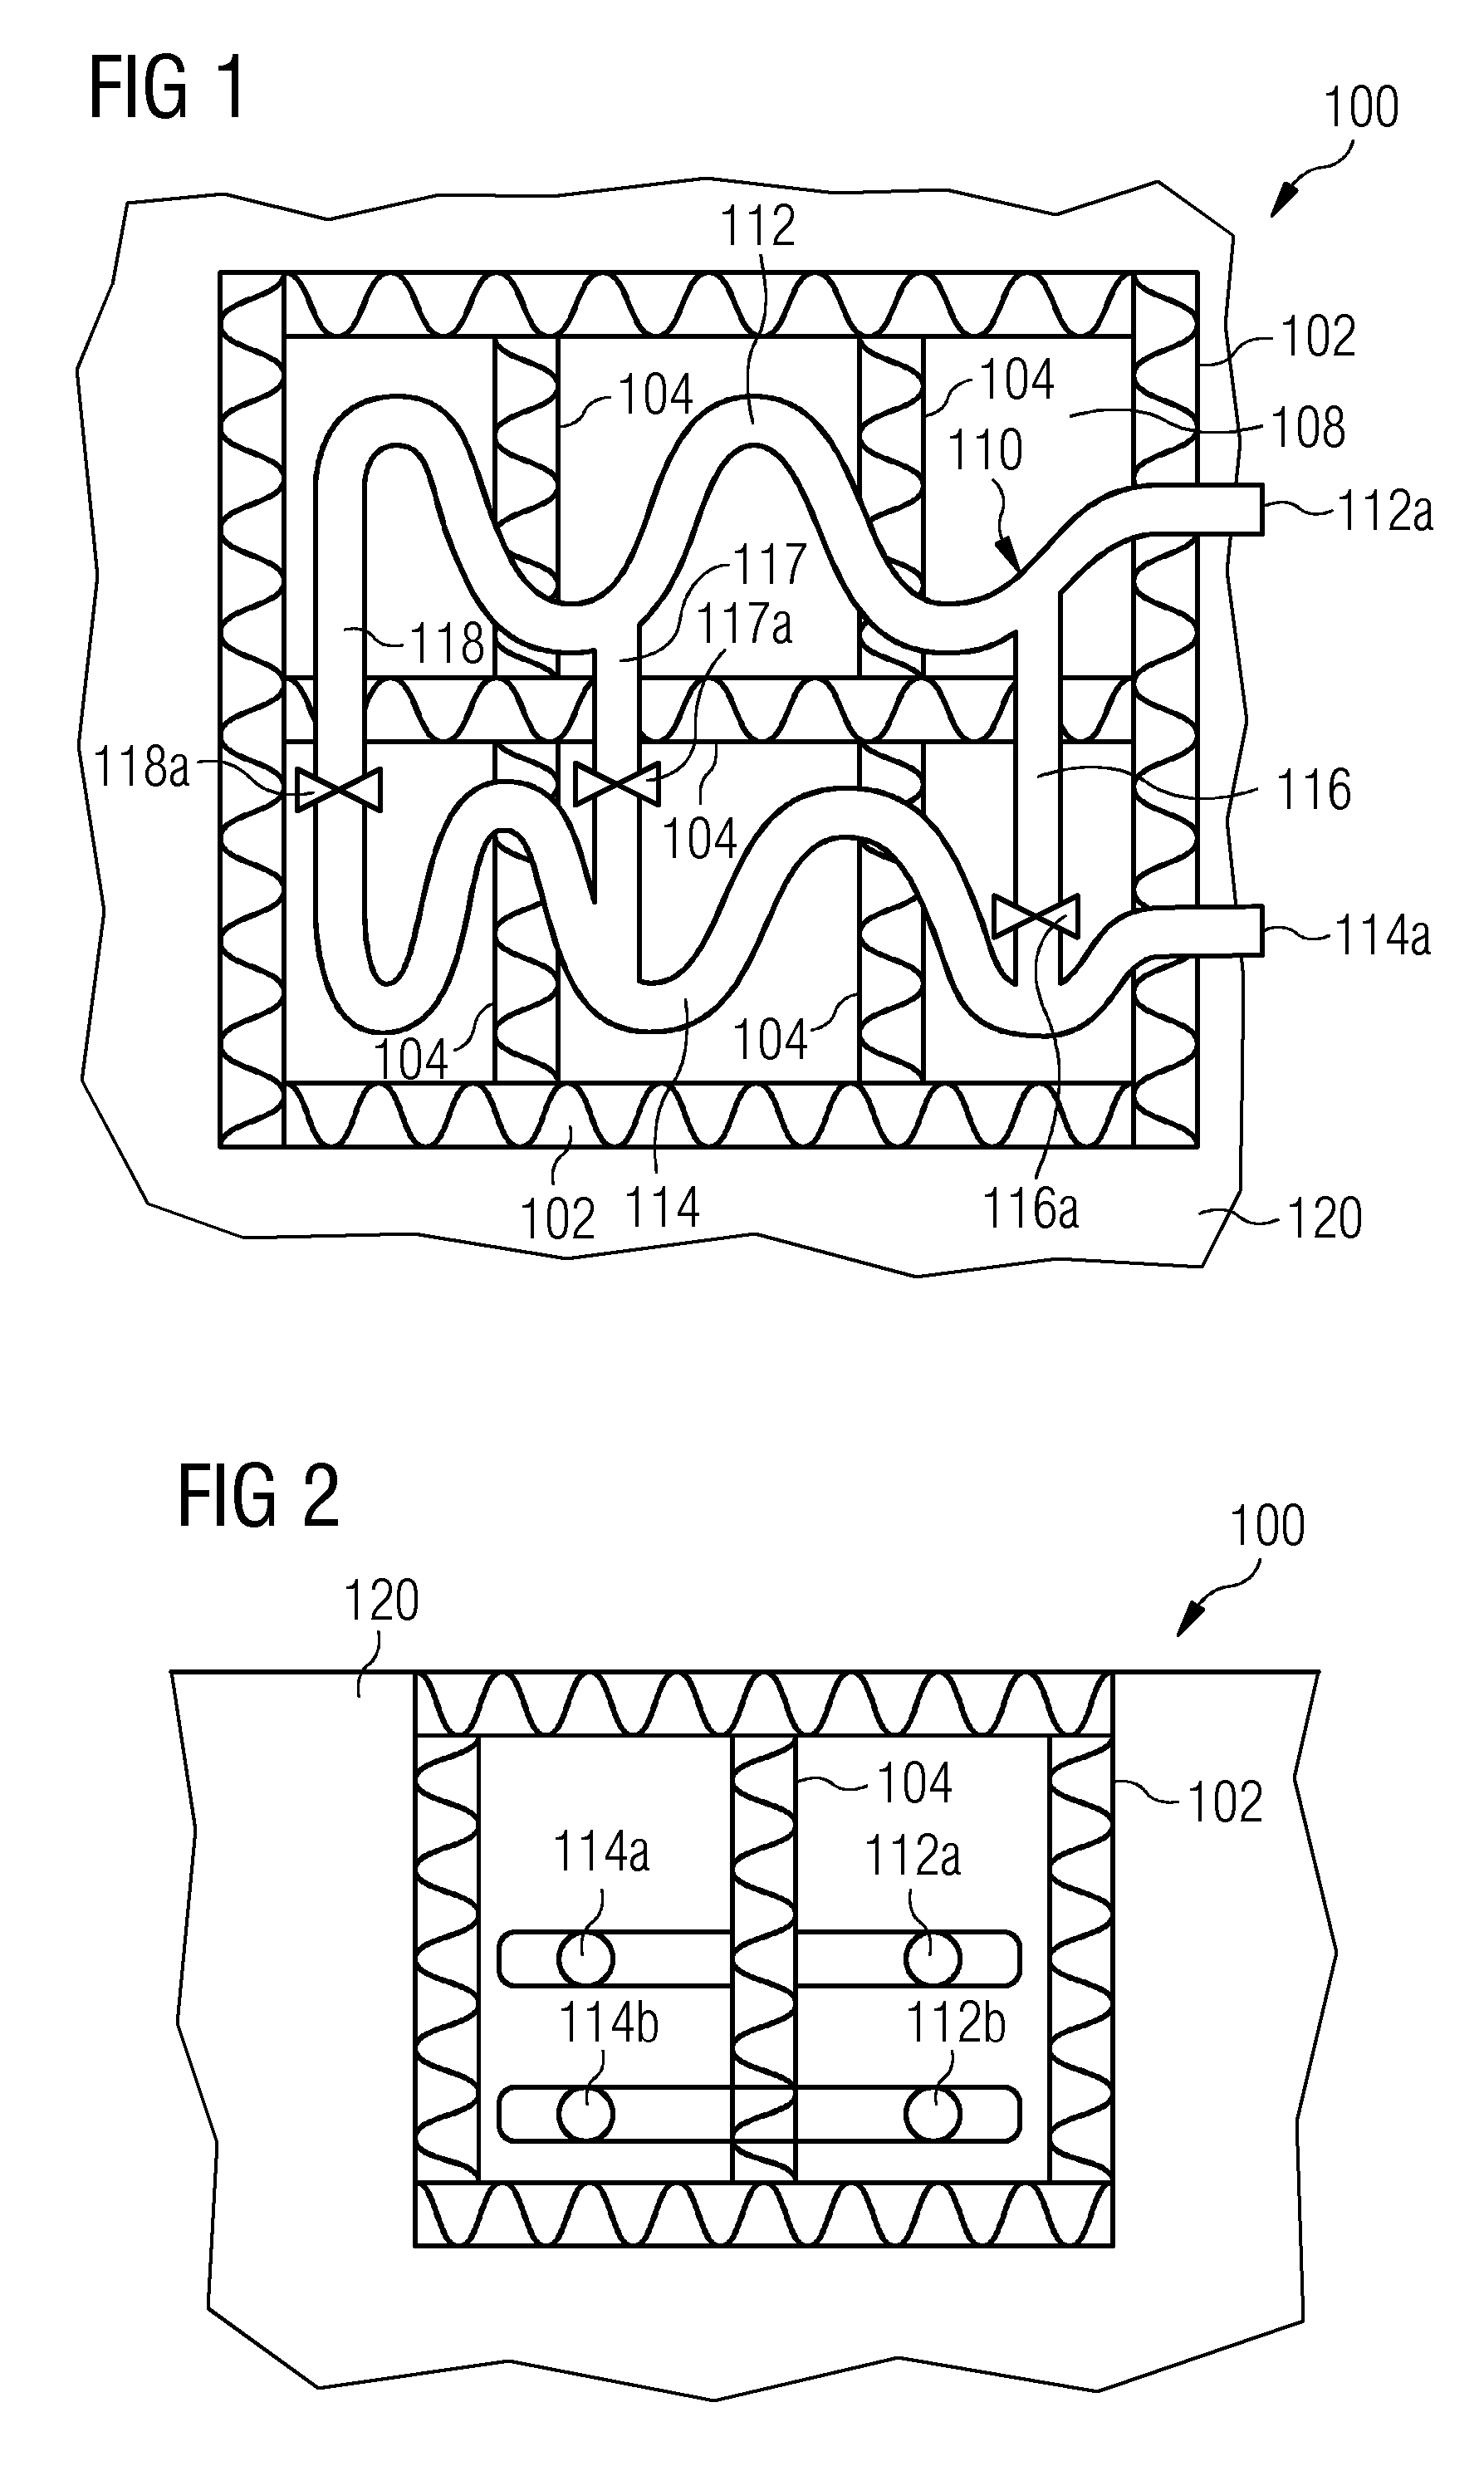 Thermal energy storage and recovery device and system having a heat exchanger arrangement using a compressed gas